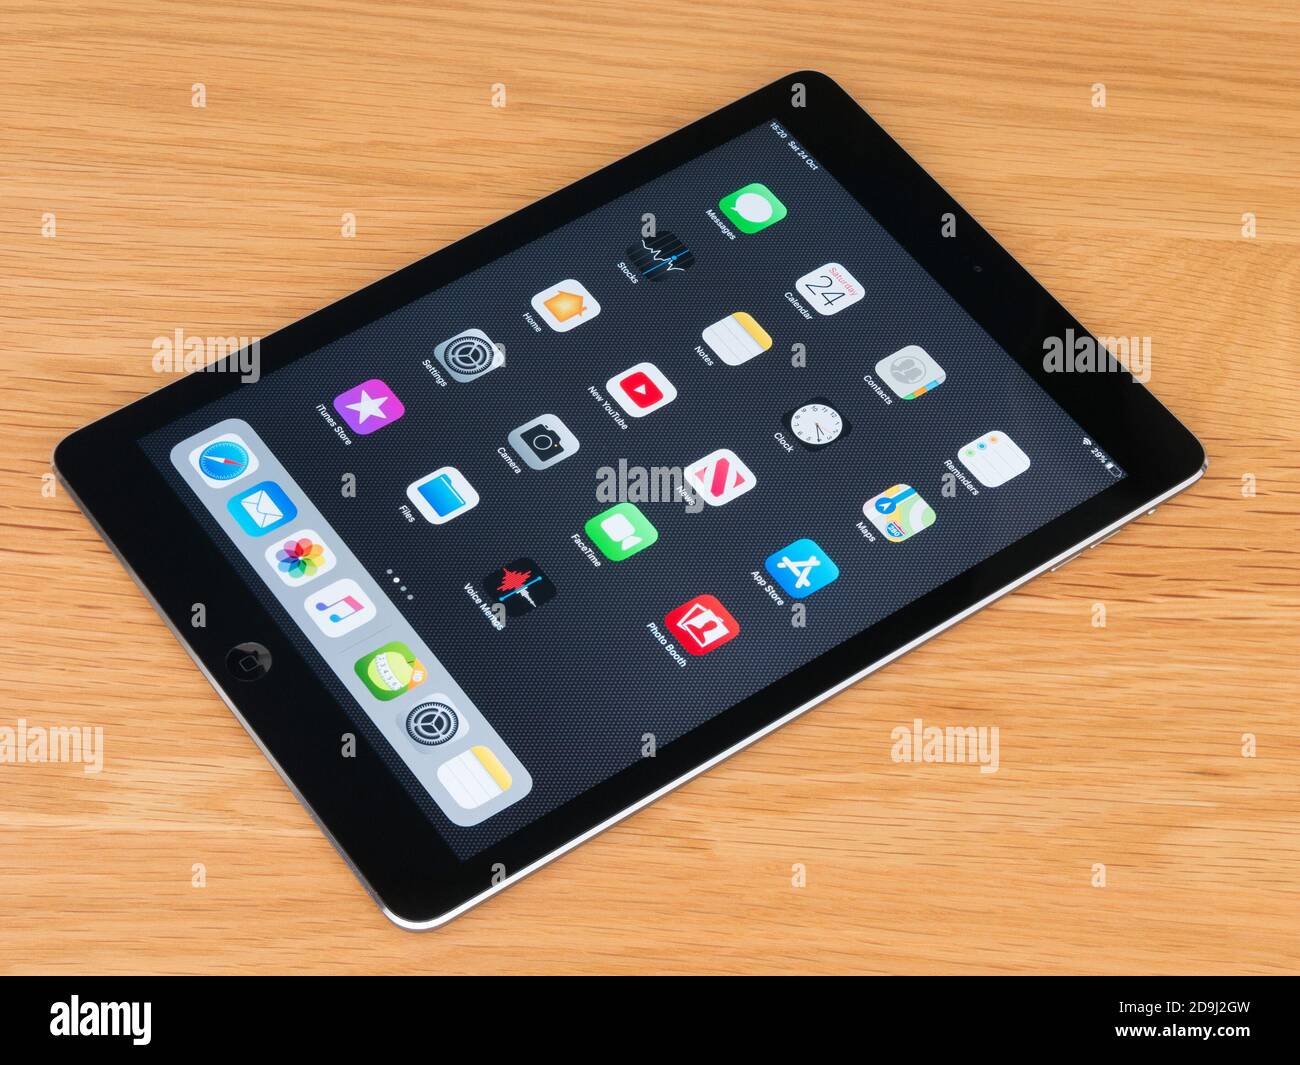 Black iPad Air 1 Tablet Computer showing icons on home screen on wooden desk Stock Photo